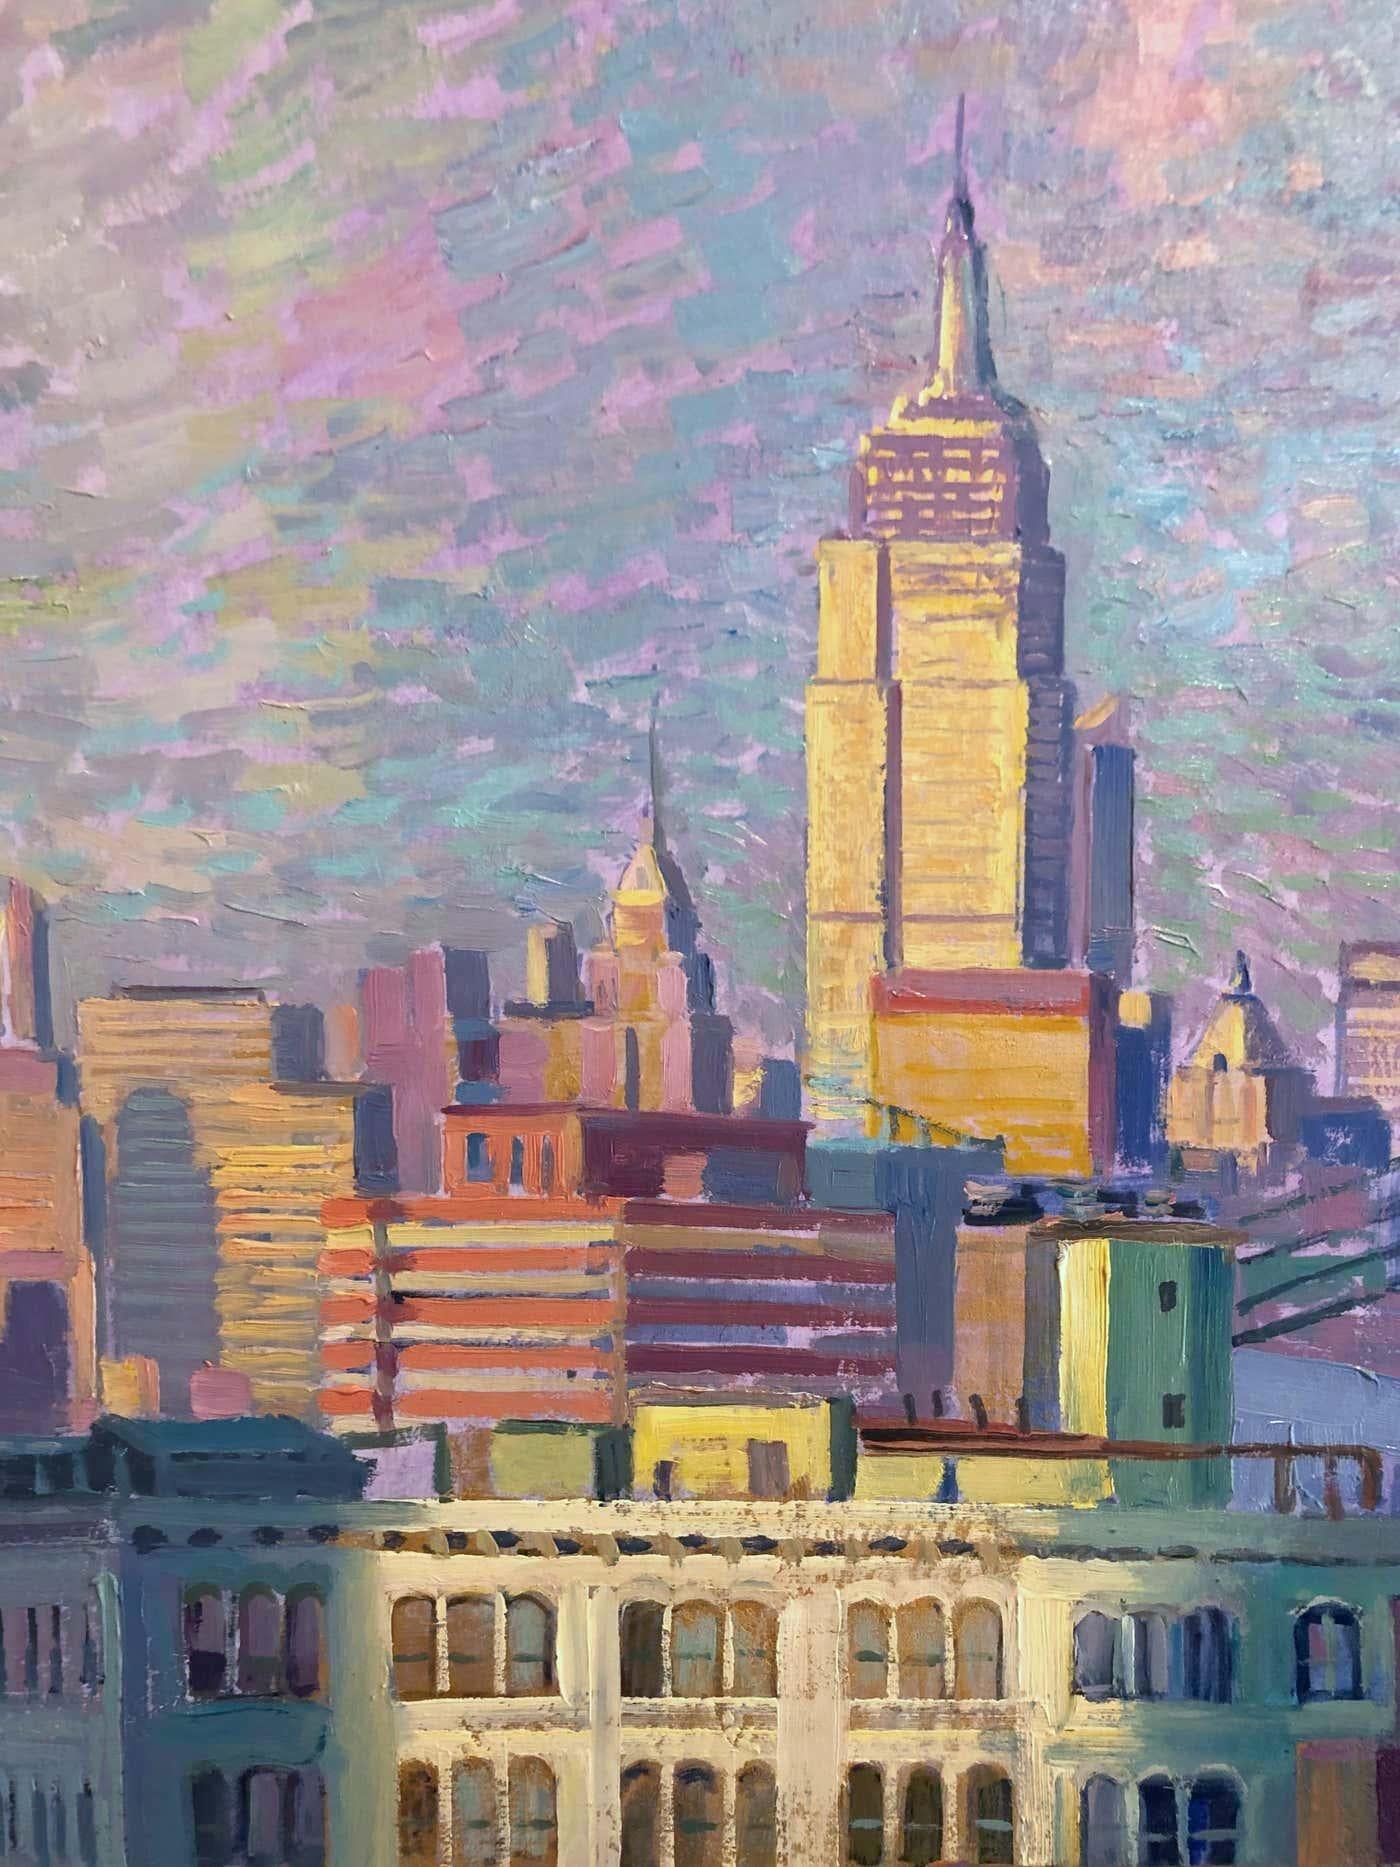 This original cityscape study by Juan Del Pozo creates an impression of the style and character associated with the renowned American setting. A myriad of impasto brush strokes intricately describes the architecture of the metropolis, evoking the